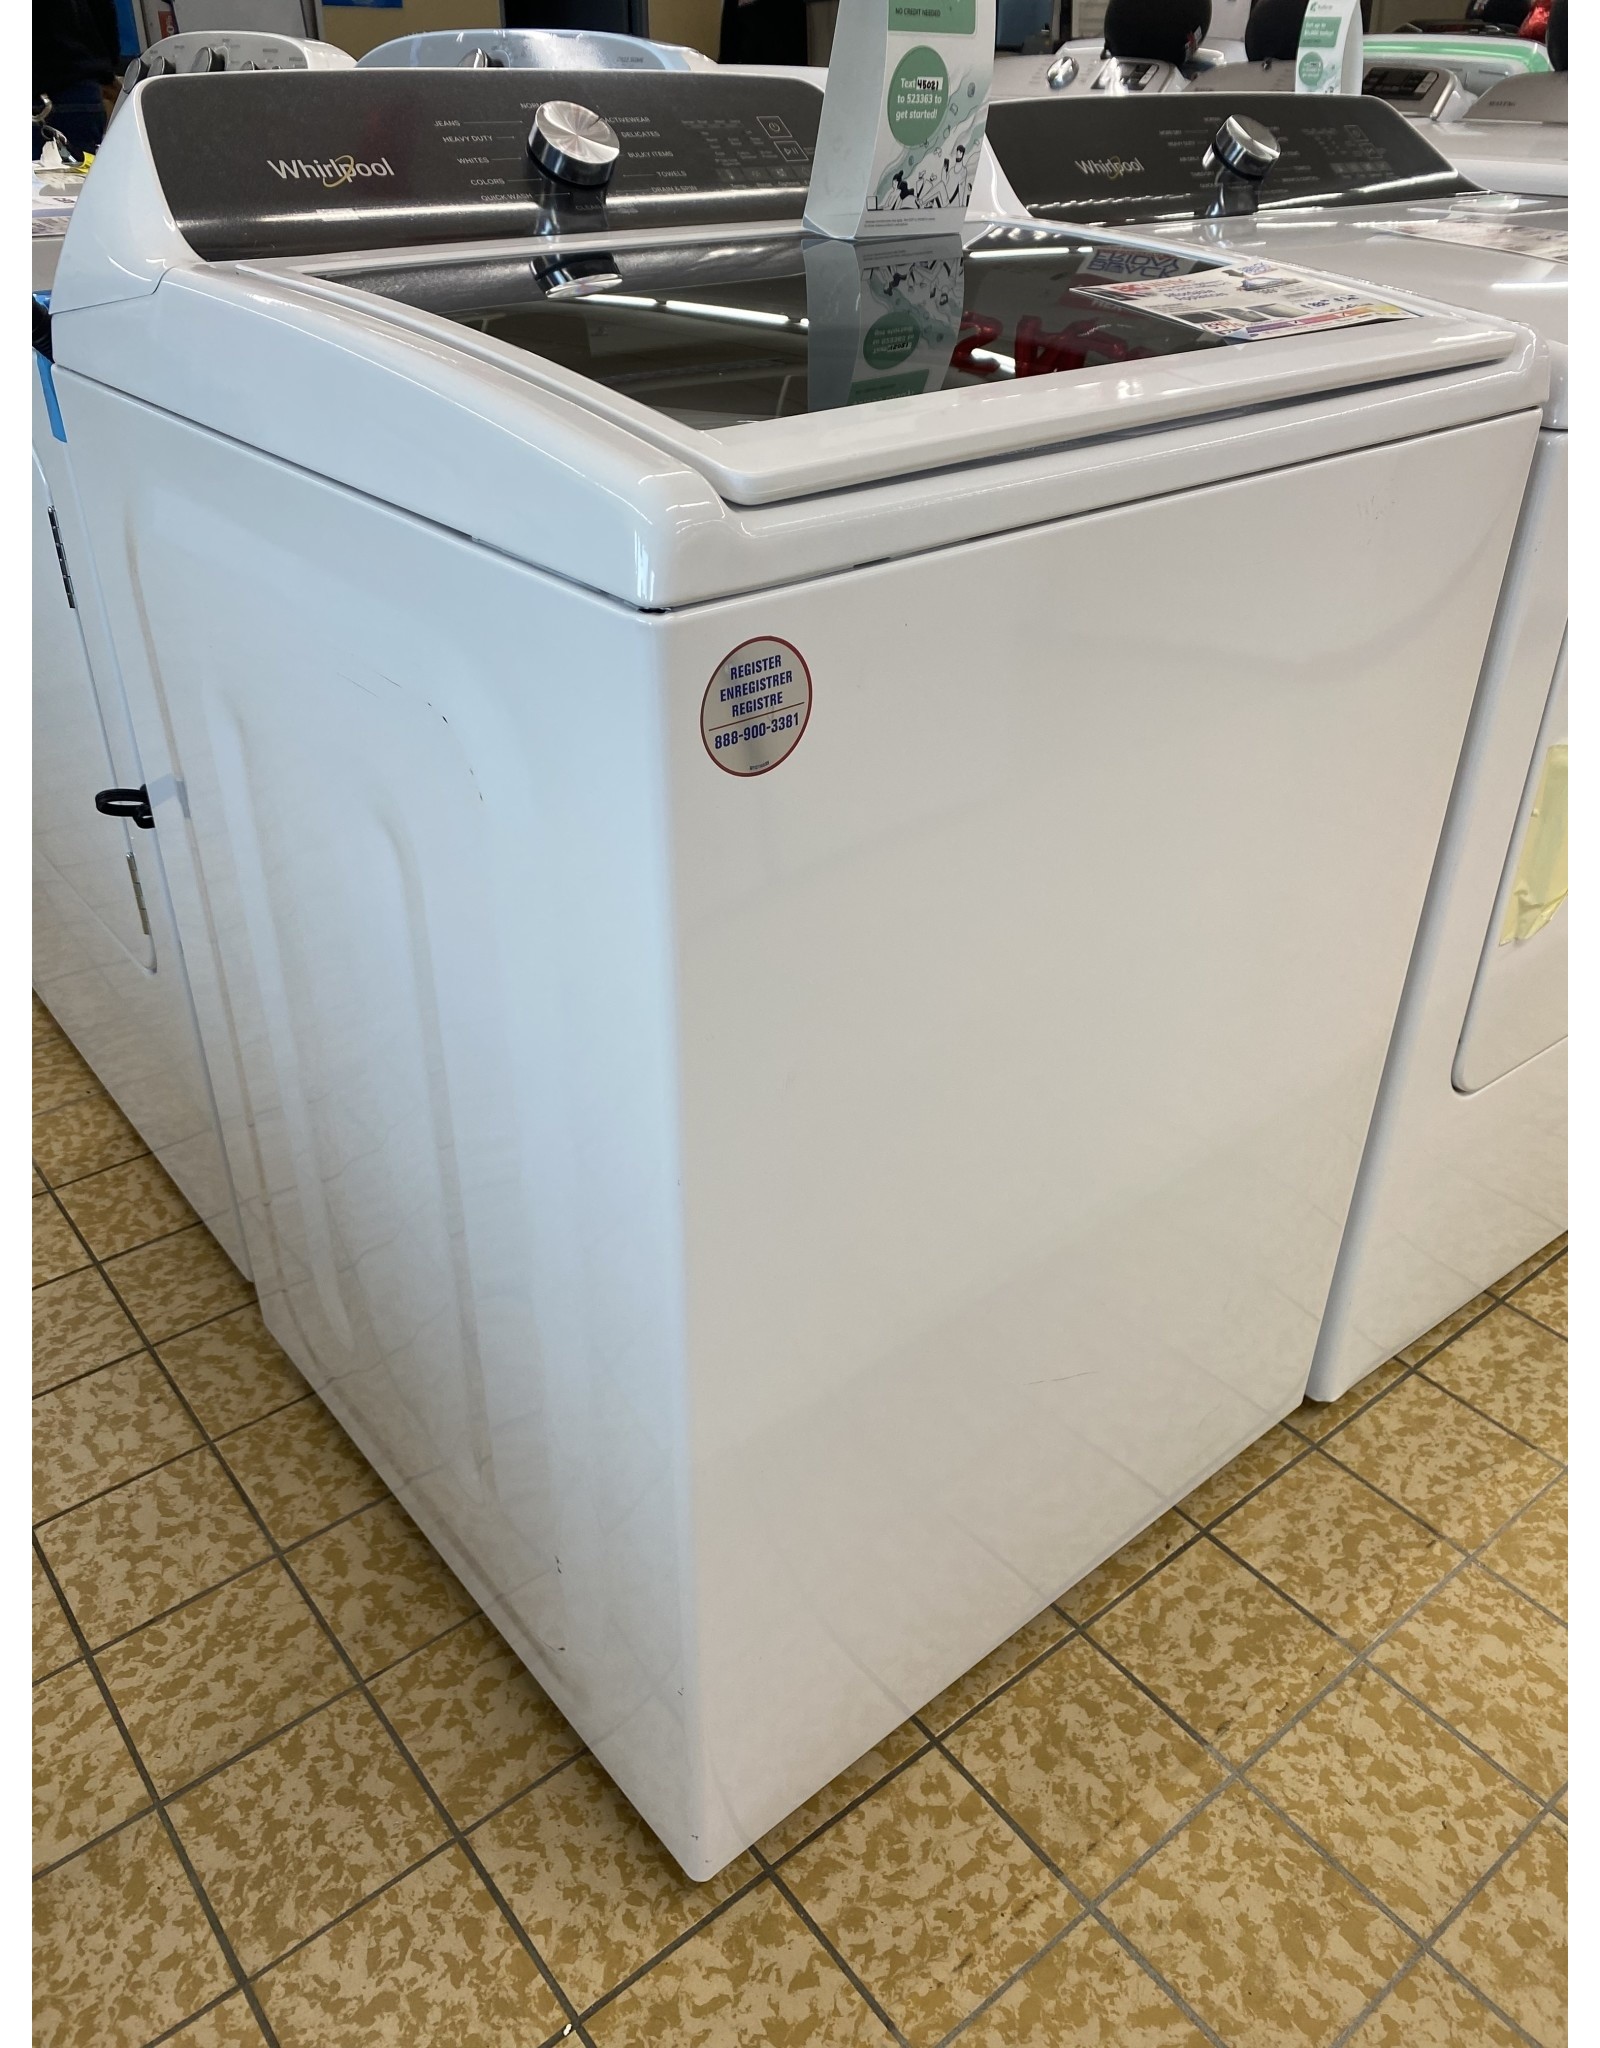 WHIRLPOOL WTW5057LW  4.7 - 4.8 cu. ft. Top Load Washer with 2 in 1 Removable Agitator in White